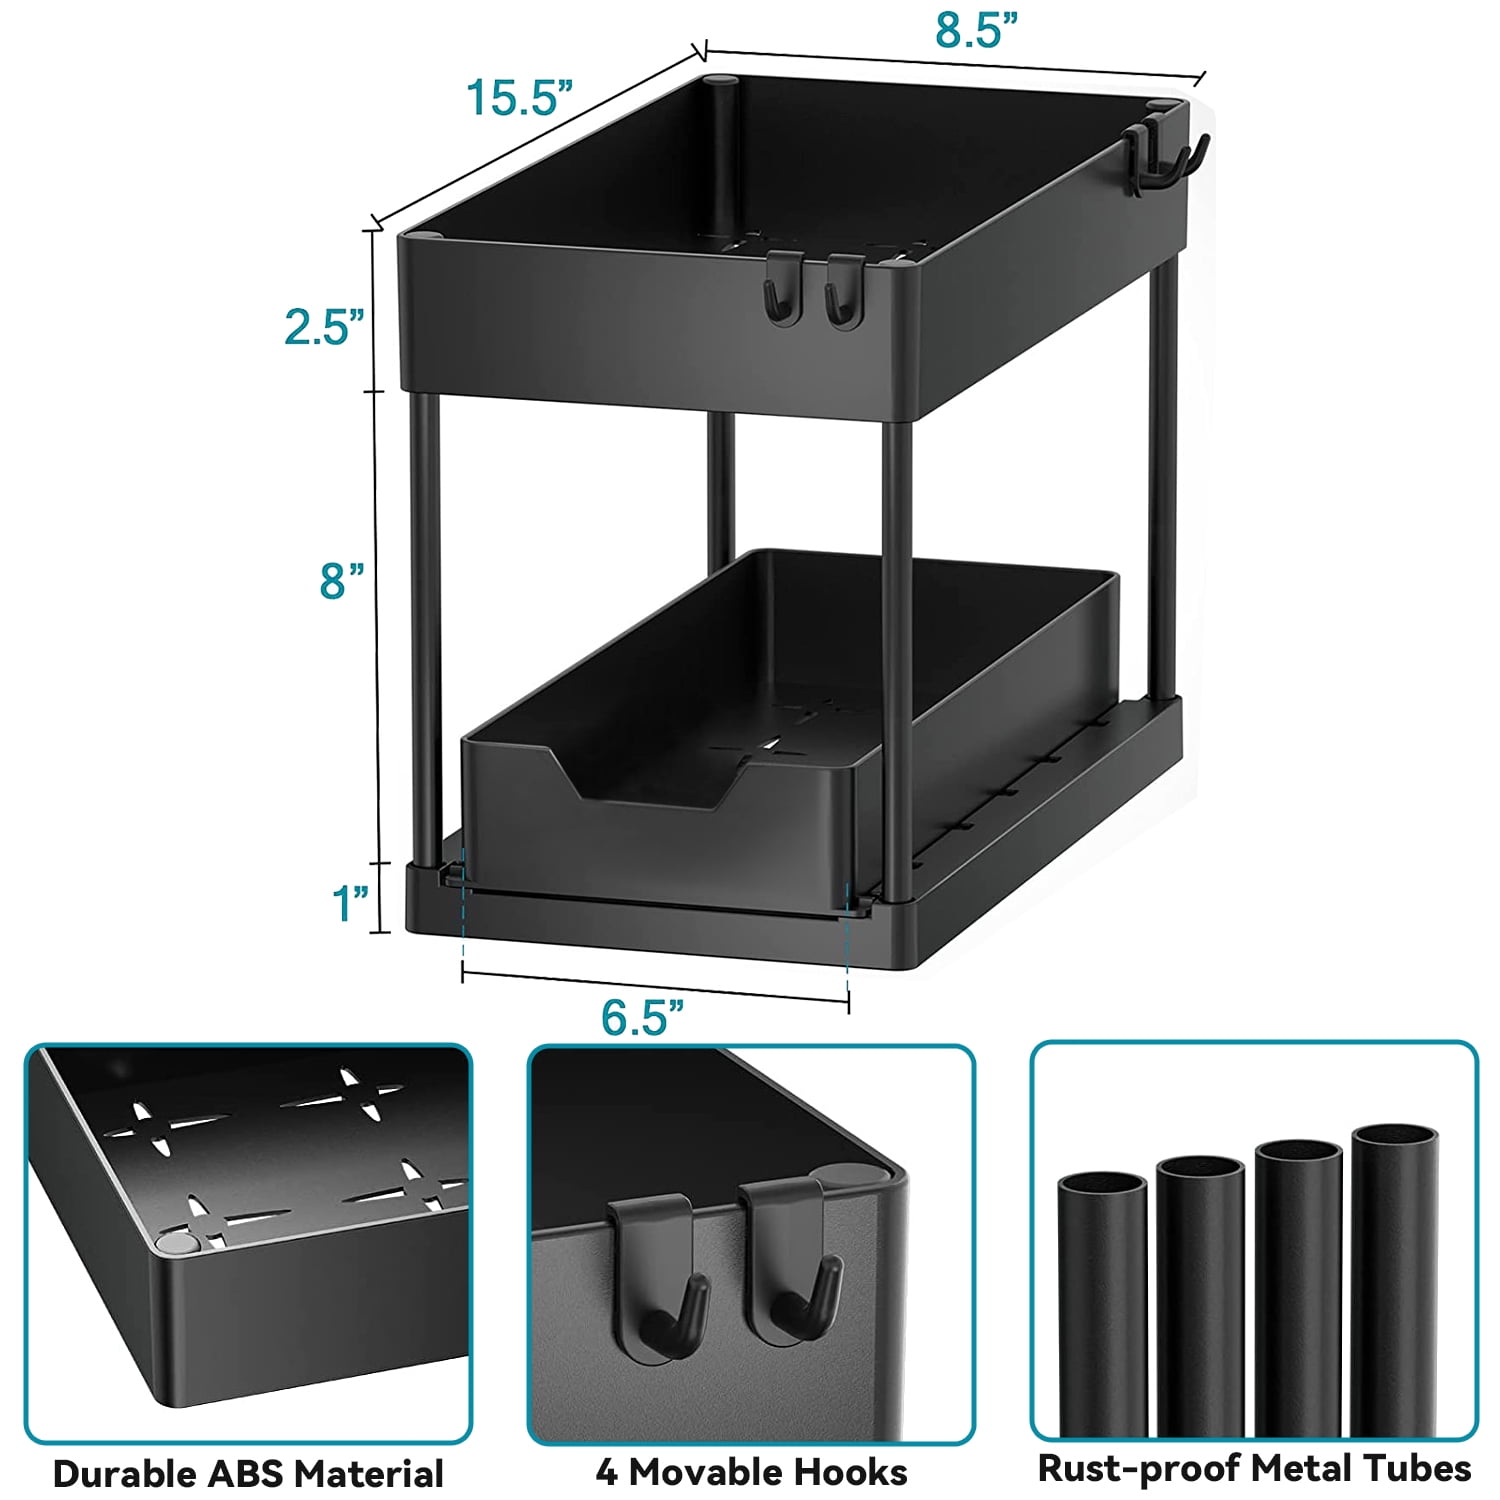  SBD 2 Pack UnderSink Organizers and Storage, 2-tier Sliding  Under Cabinet Organizer for Bathroom and Kitchen with Multi Purpose Door  Organizer, 4 Cups, and 10 Hooks - Black